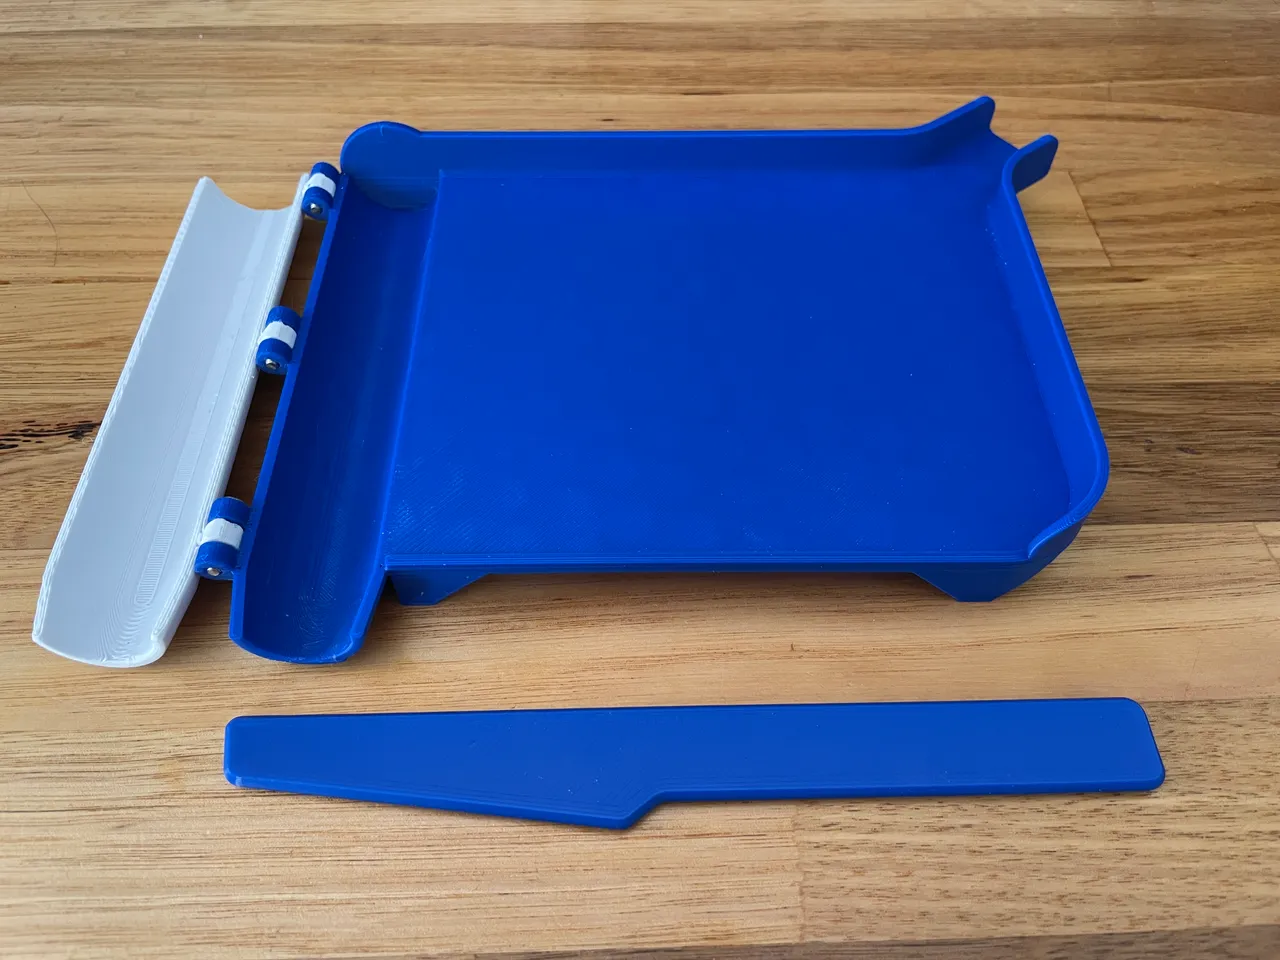 Pill Counting / Part Sorting Tray by ericsnis